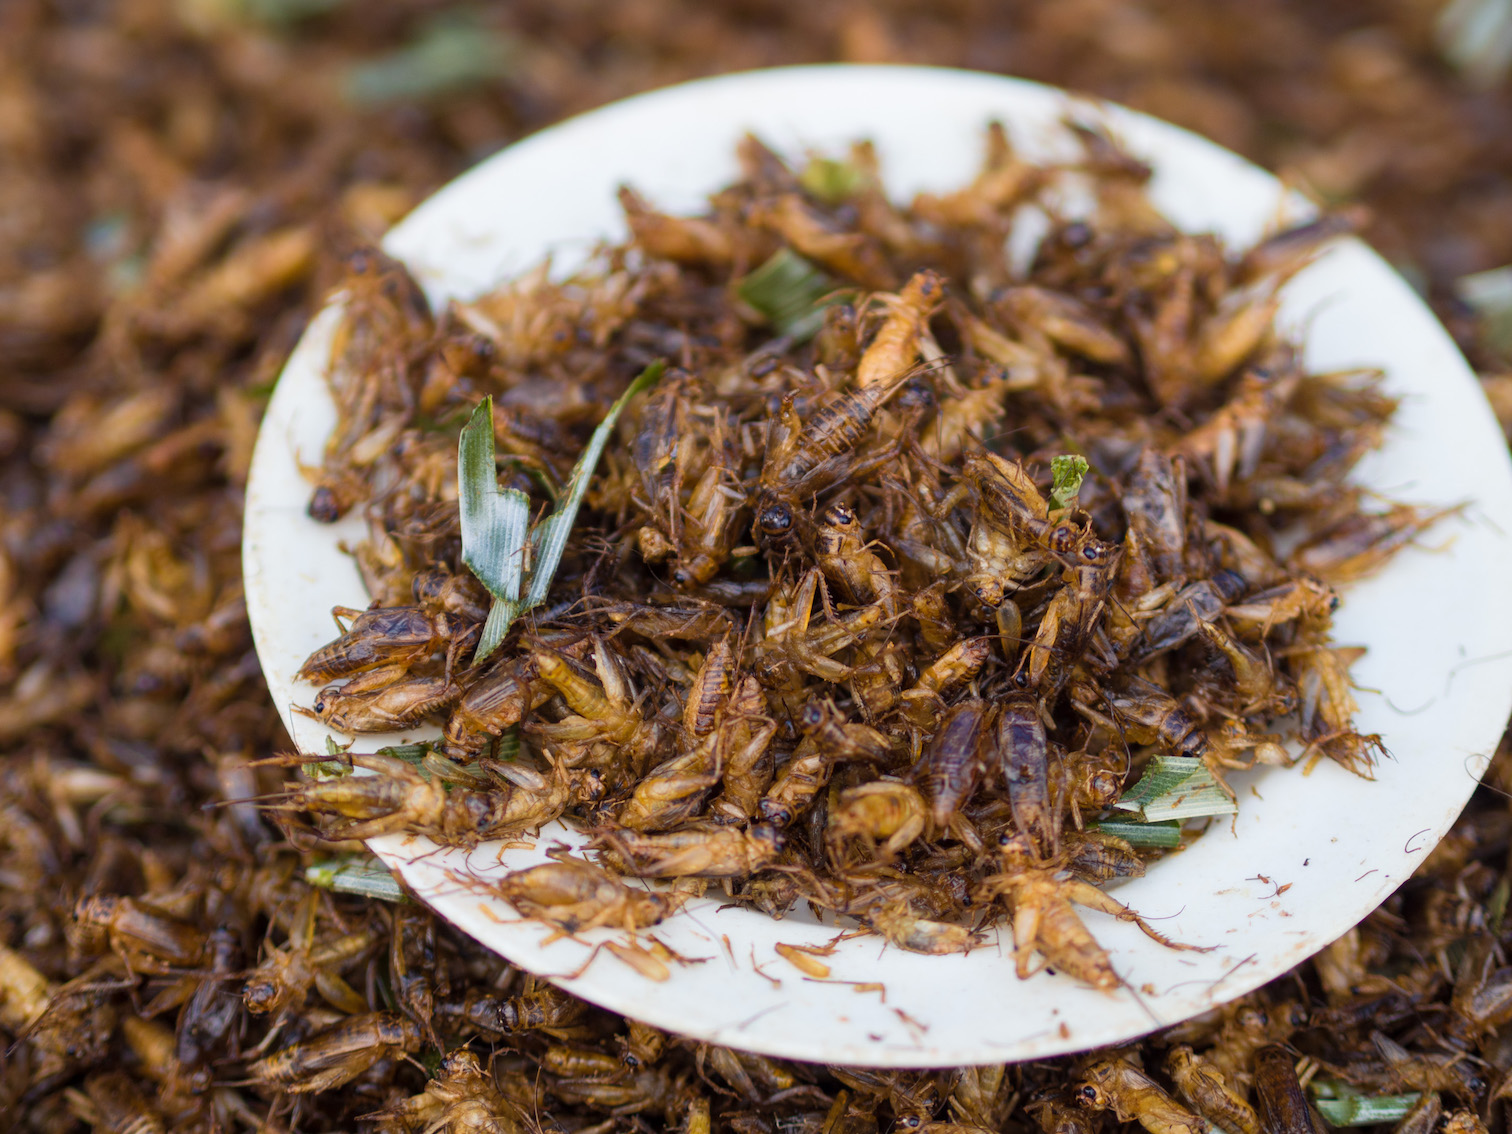 Are insects the solution to solving world hunger?